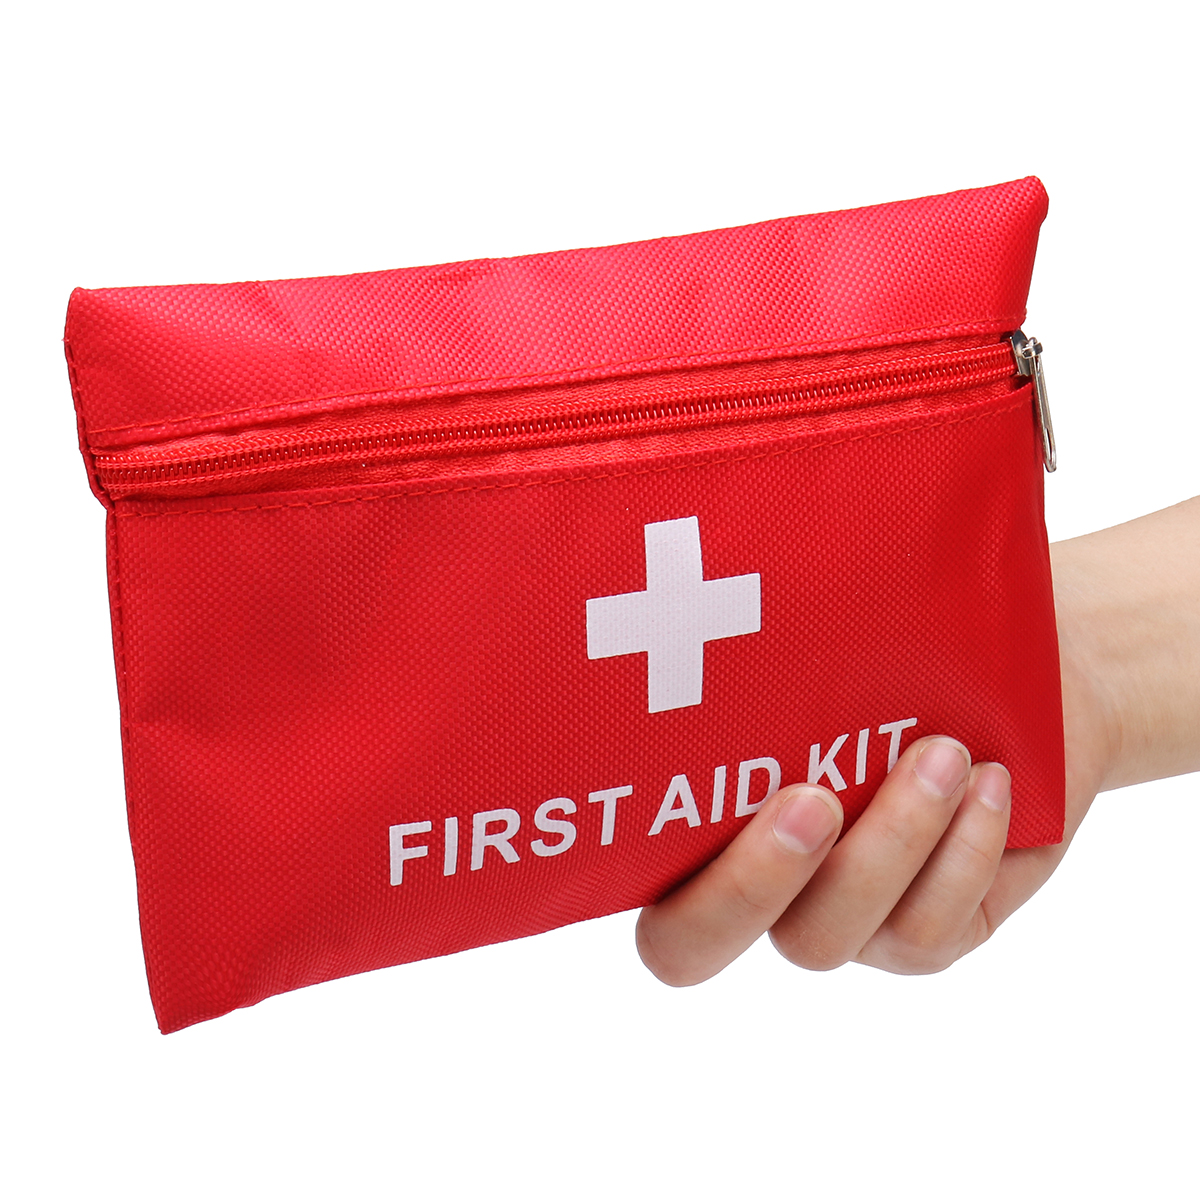 Emergency-First-Aid-Kit-79-Piece-Survival-Supplies-Bag-for-Car-Travel-Home-Emergency-Box-1420491-7